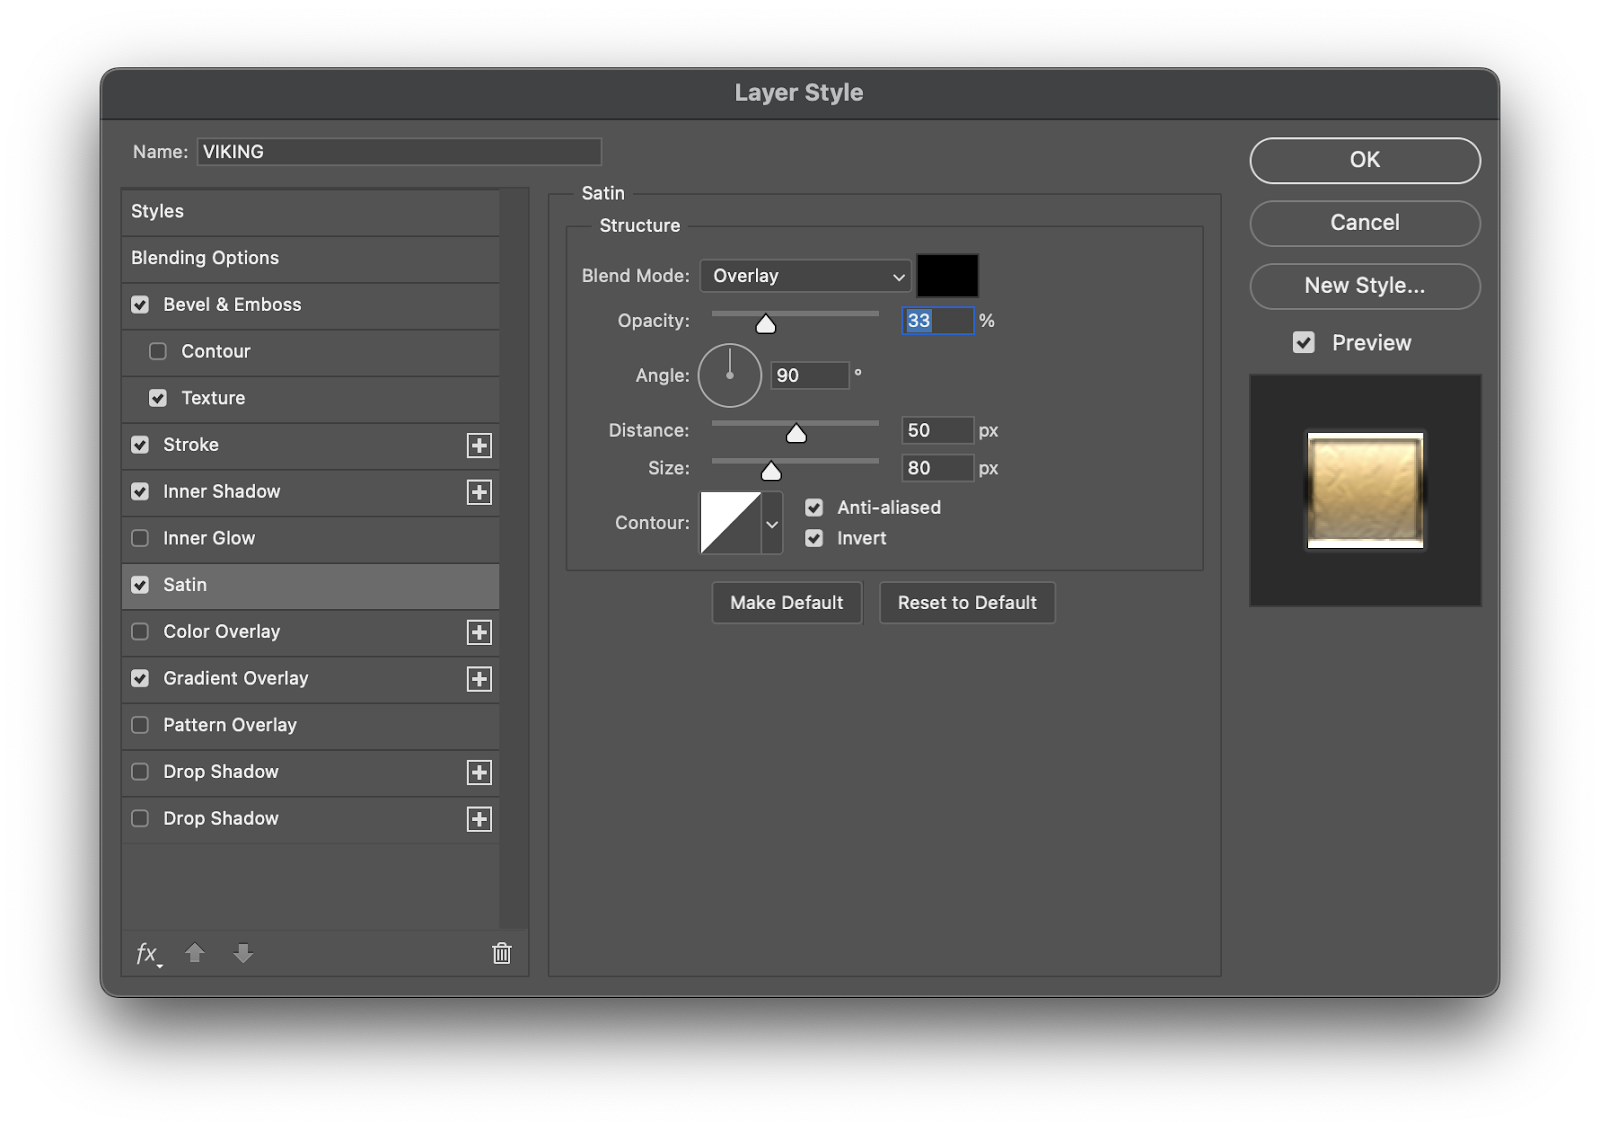 Image from the Photoshop Tutorial on how to create a simple and scalable gold effect with layer styles